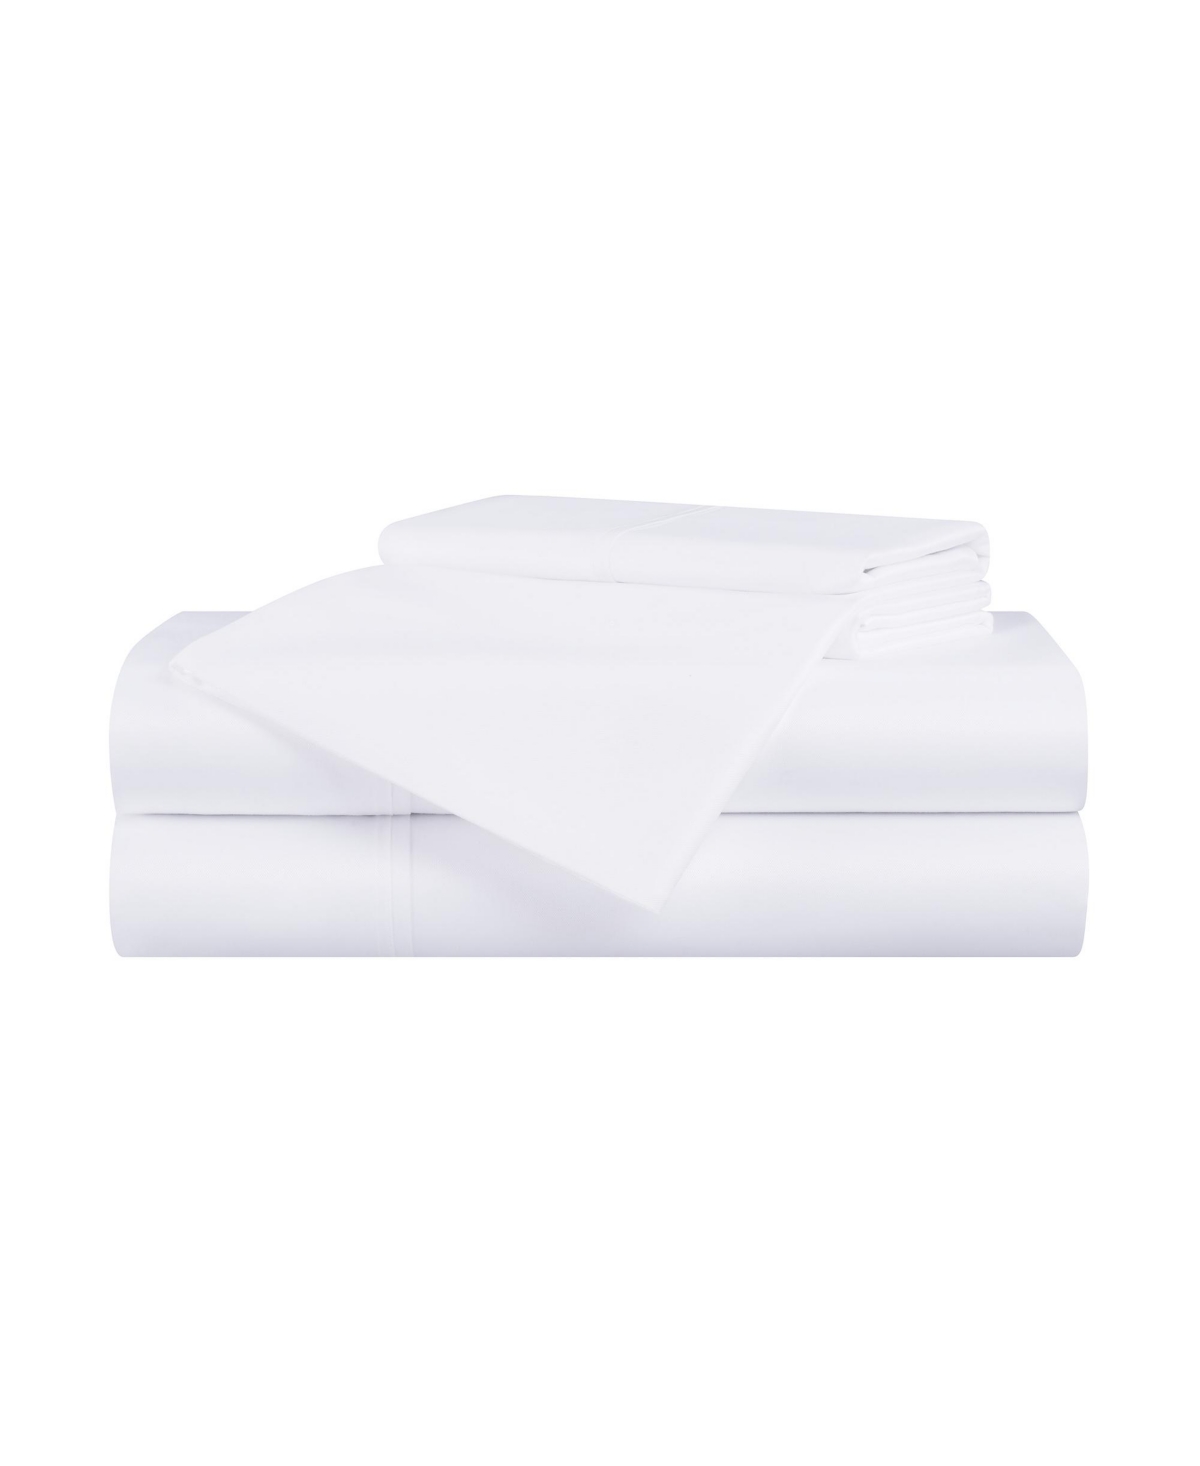 Aston And Arden Rayon From Bamboo California King Sheet Set, Ultra Silky Luxury Sheets, 1 Flat Sheet, 1 Fitted Sheet In White